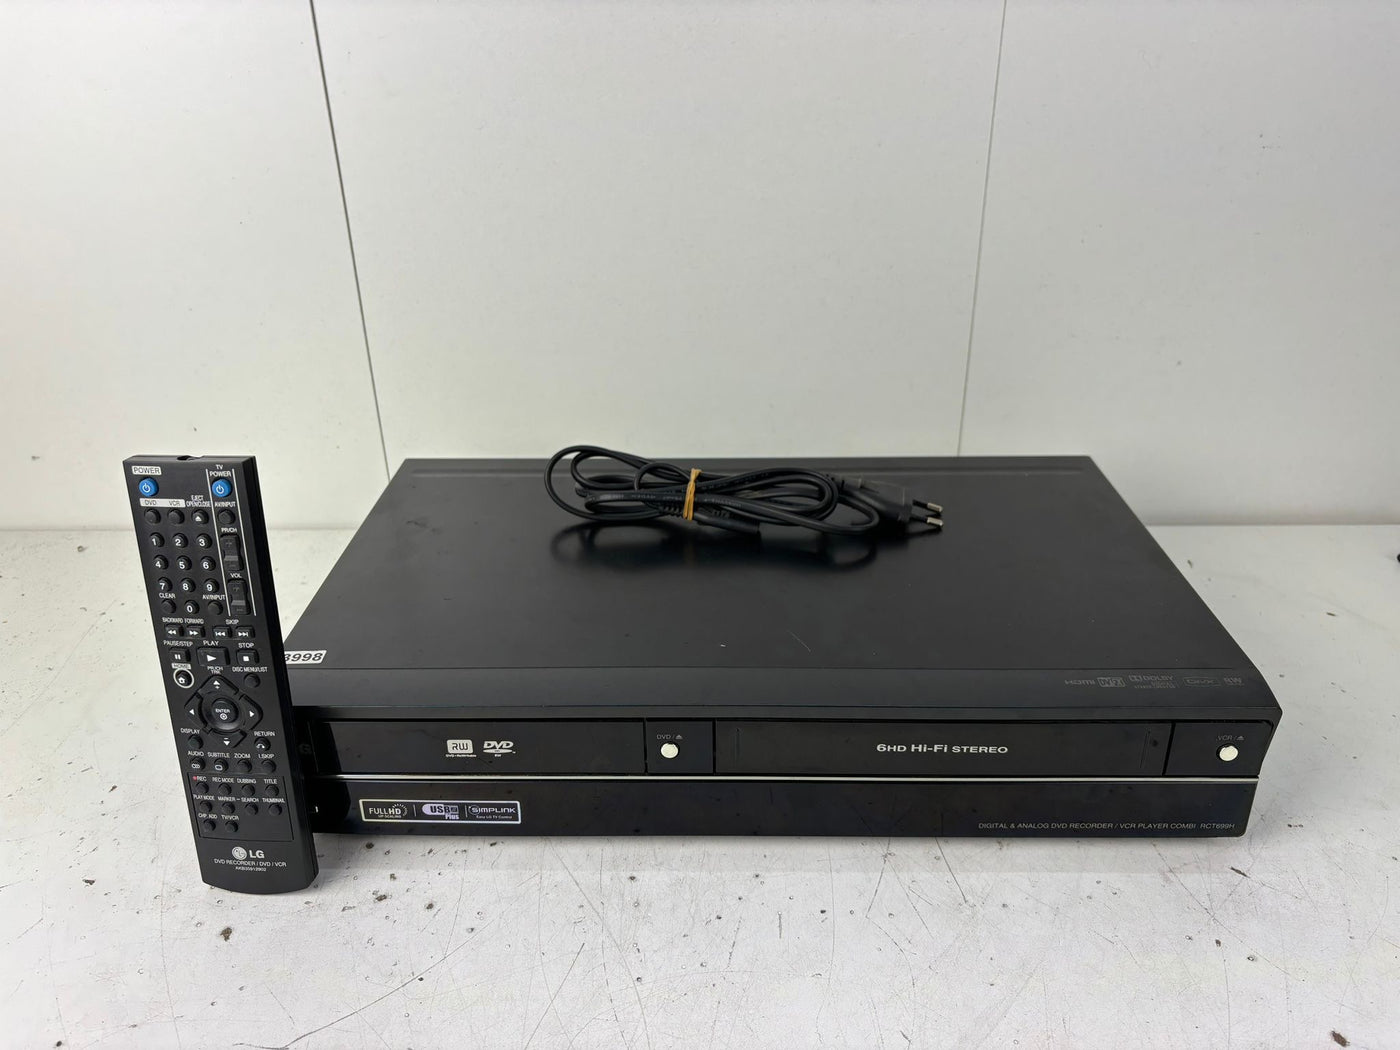 LG RCT699H DVD / VHS Combi Recorder | With Remote